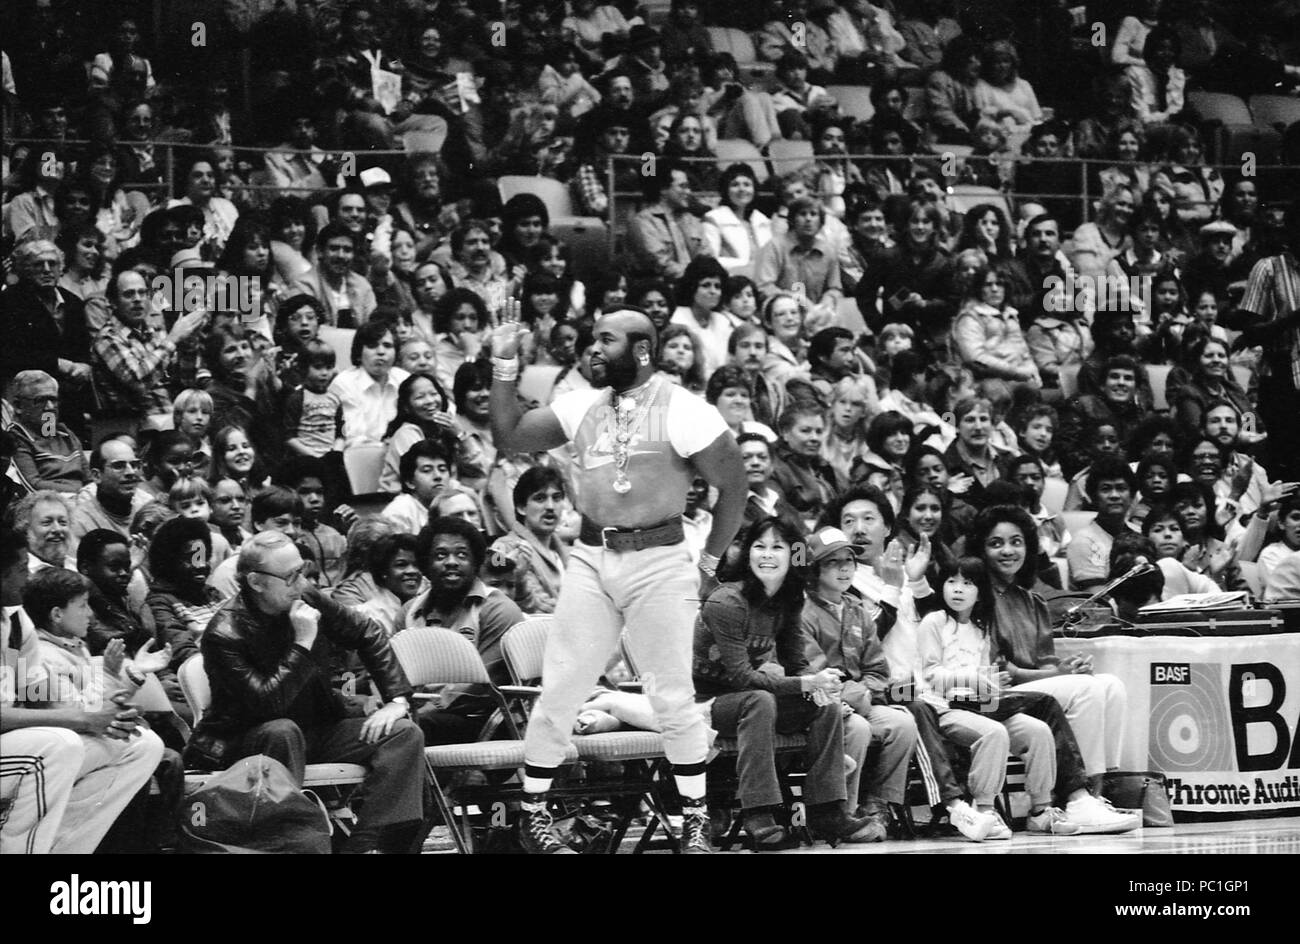 The famous Mr. T (Laurence Tureaud) at a Harlem Globetrotters' game. Los Angeles, 1983. Stock Photo